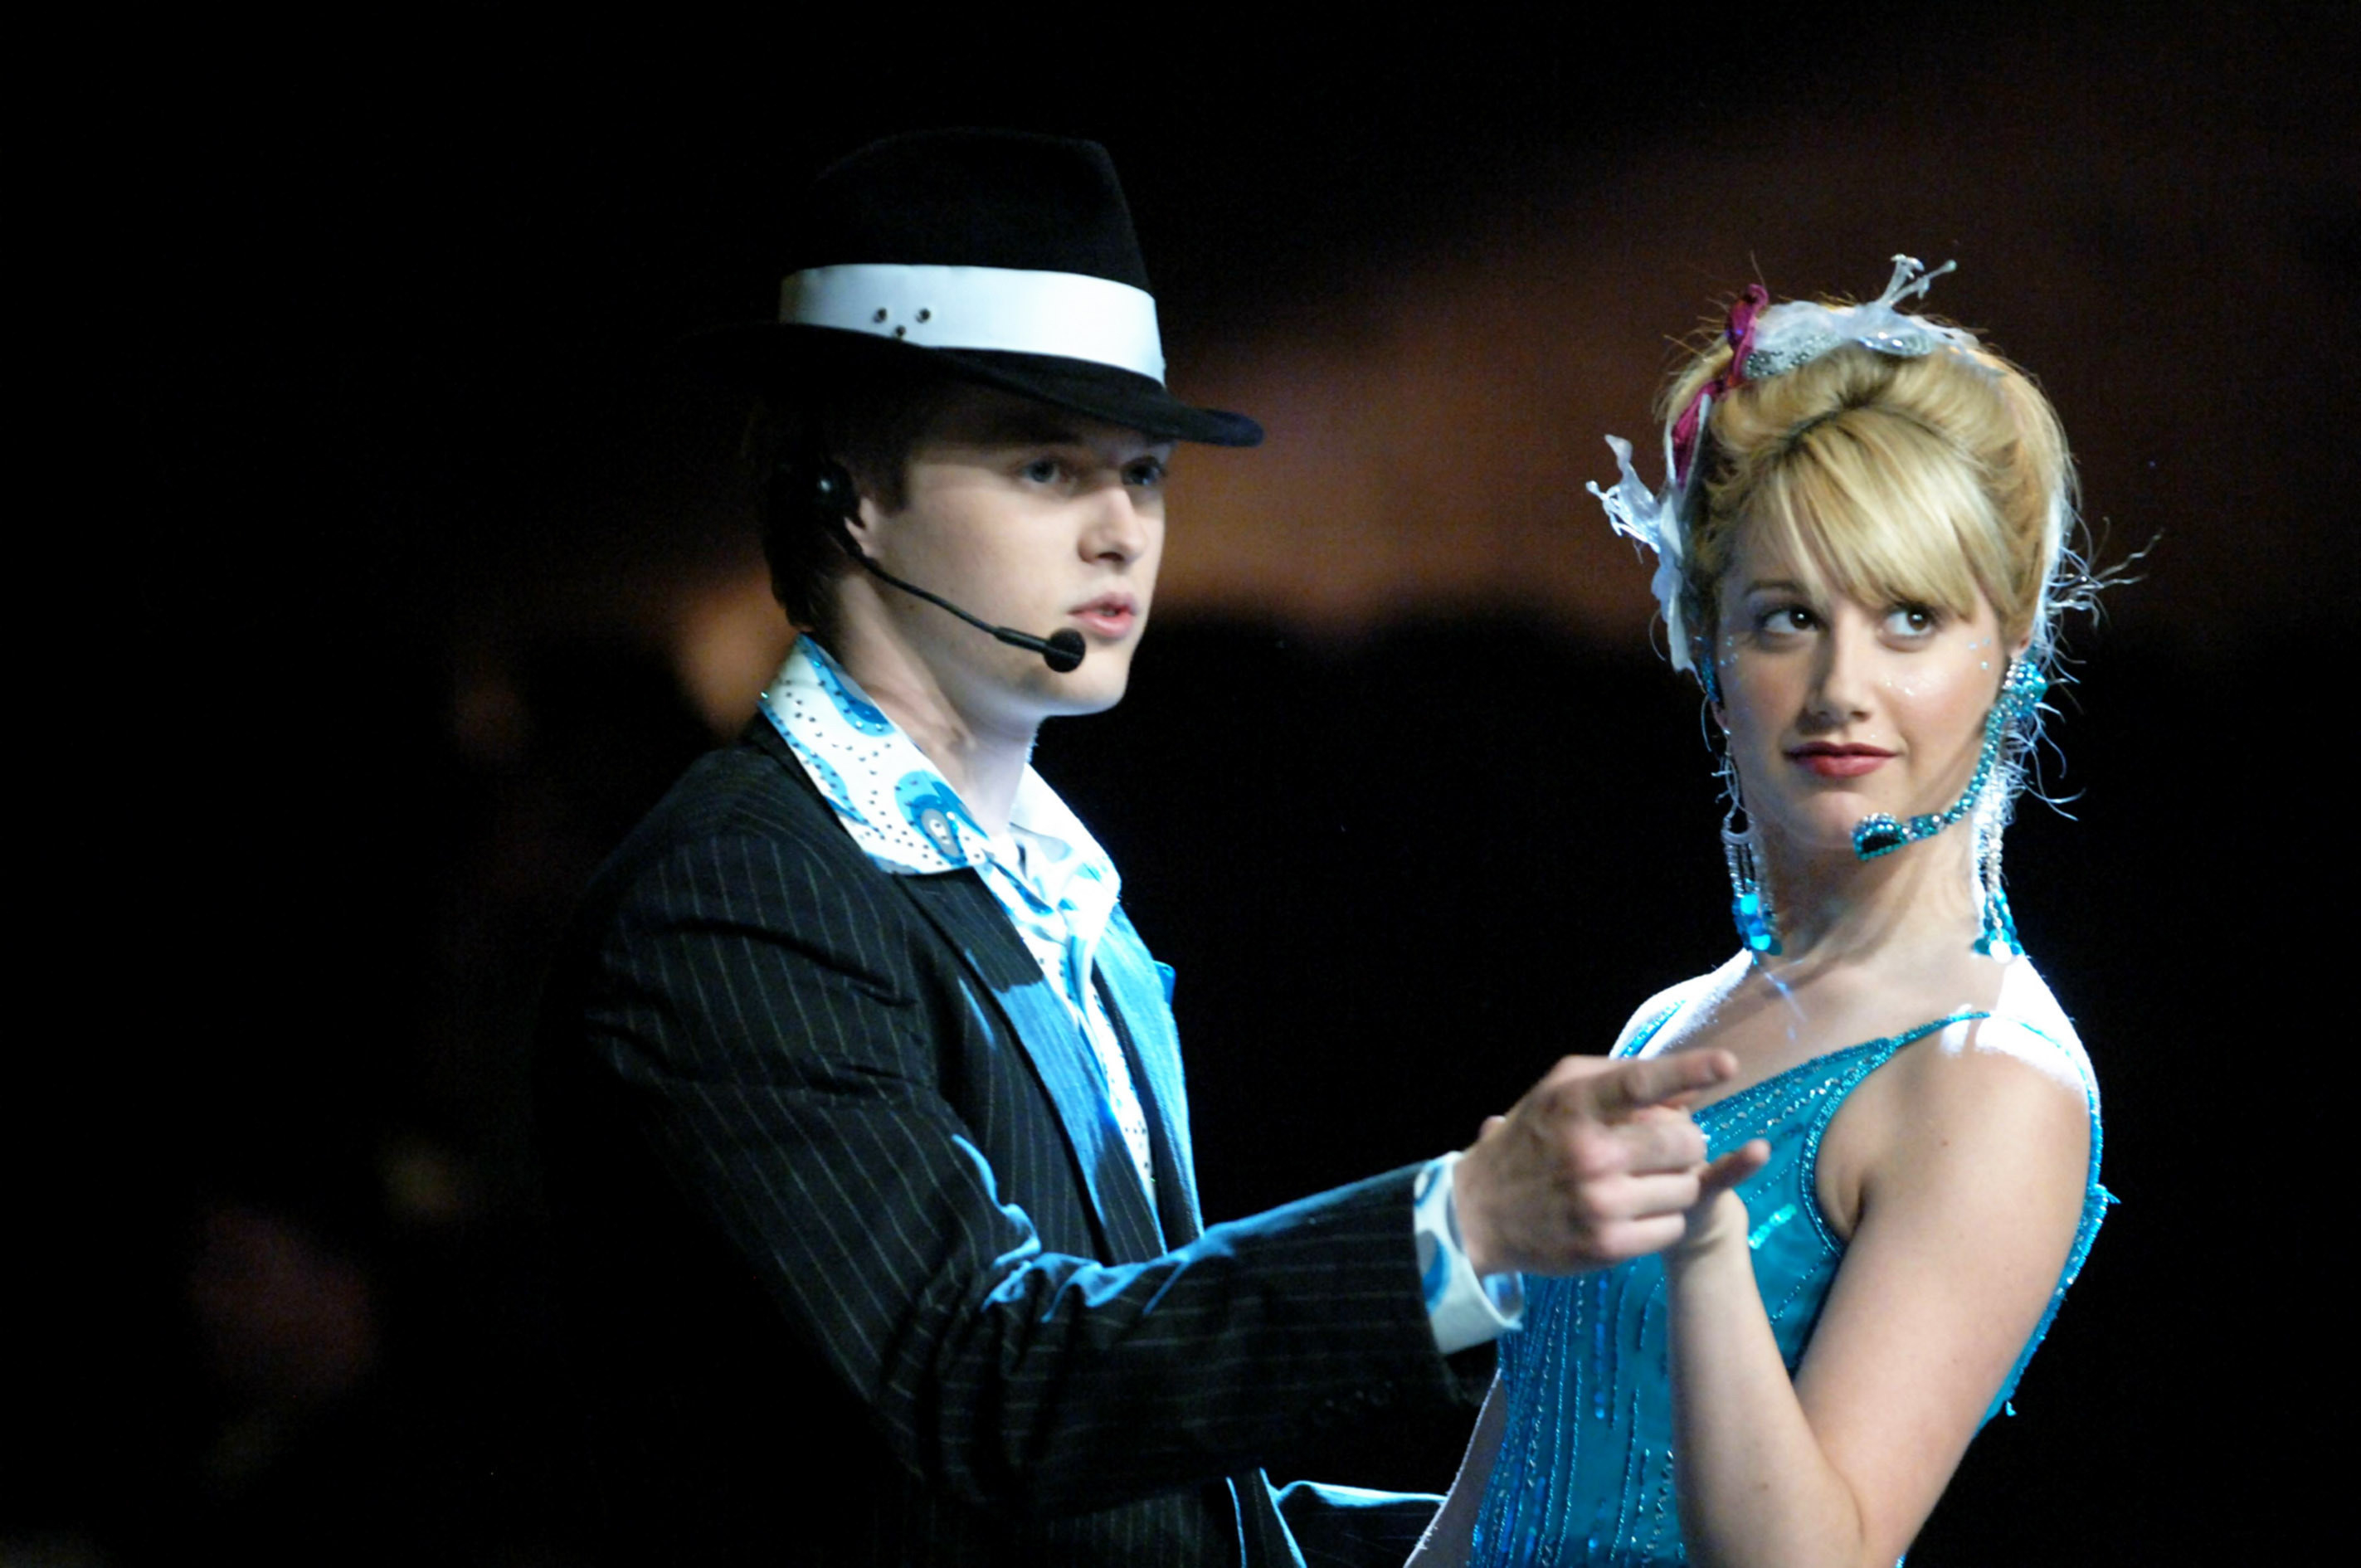 Lucas Grabeel and Ashley Tisdale in High School Musical